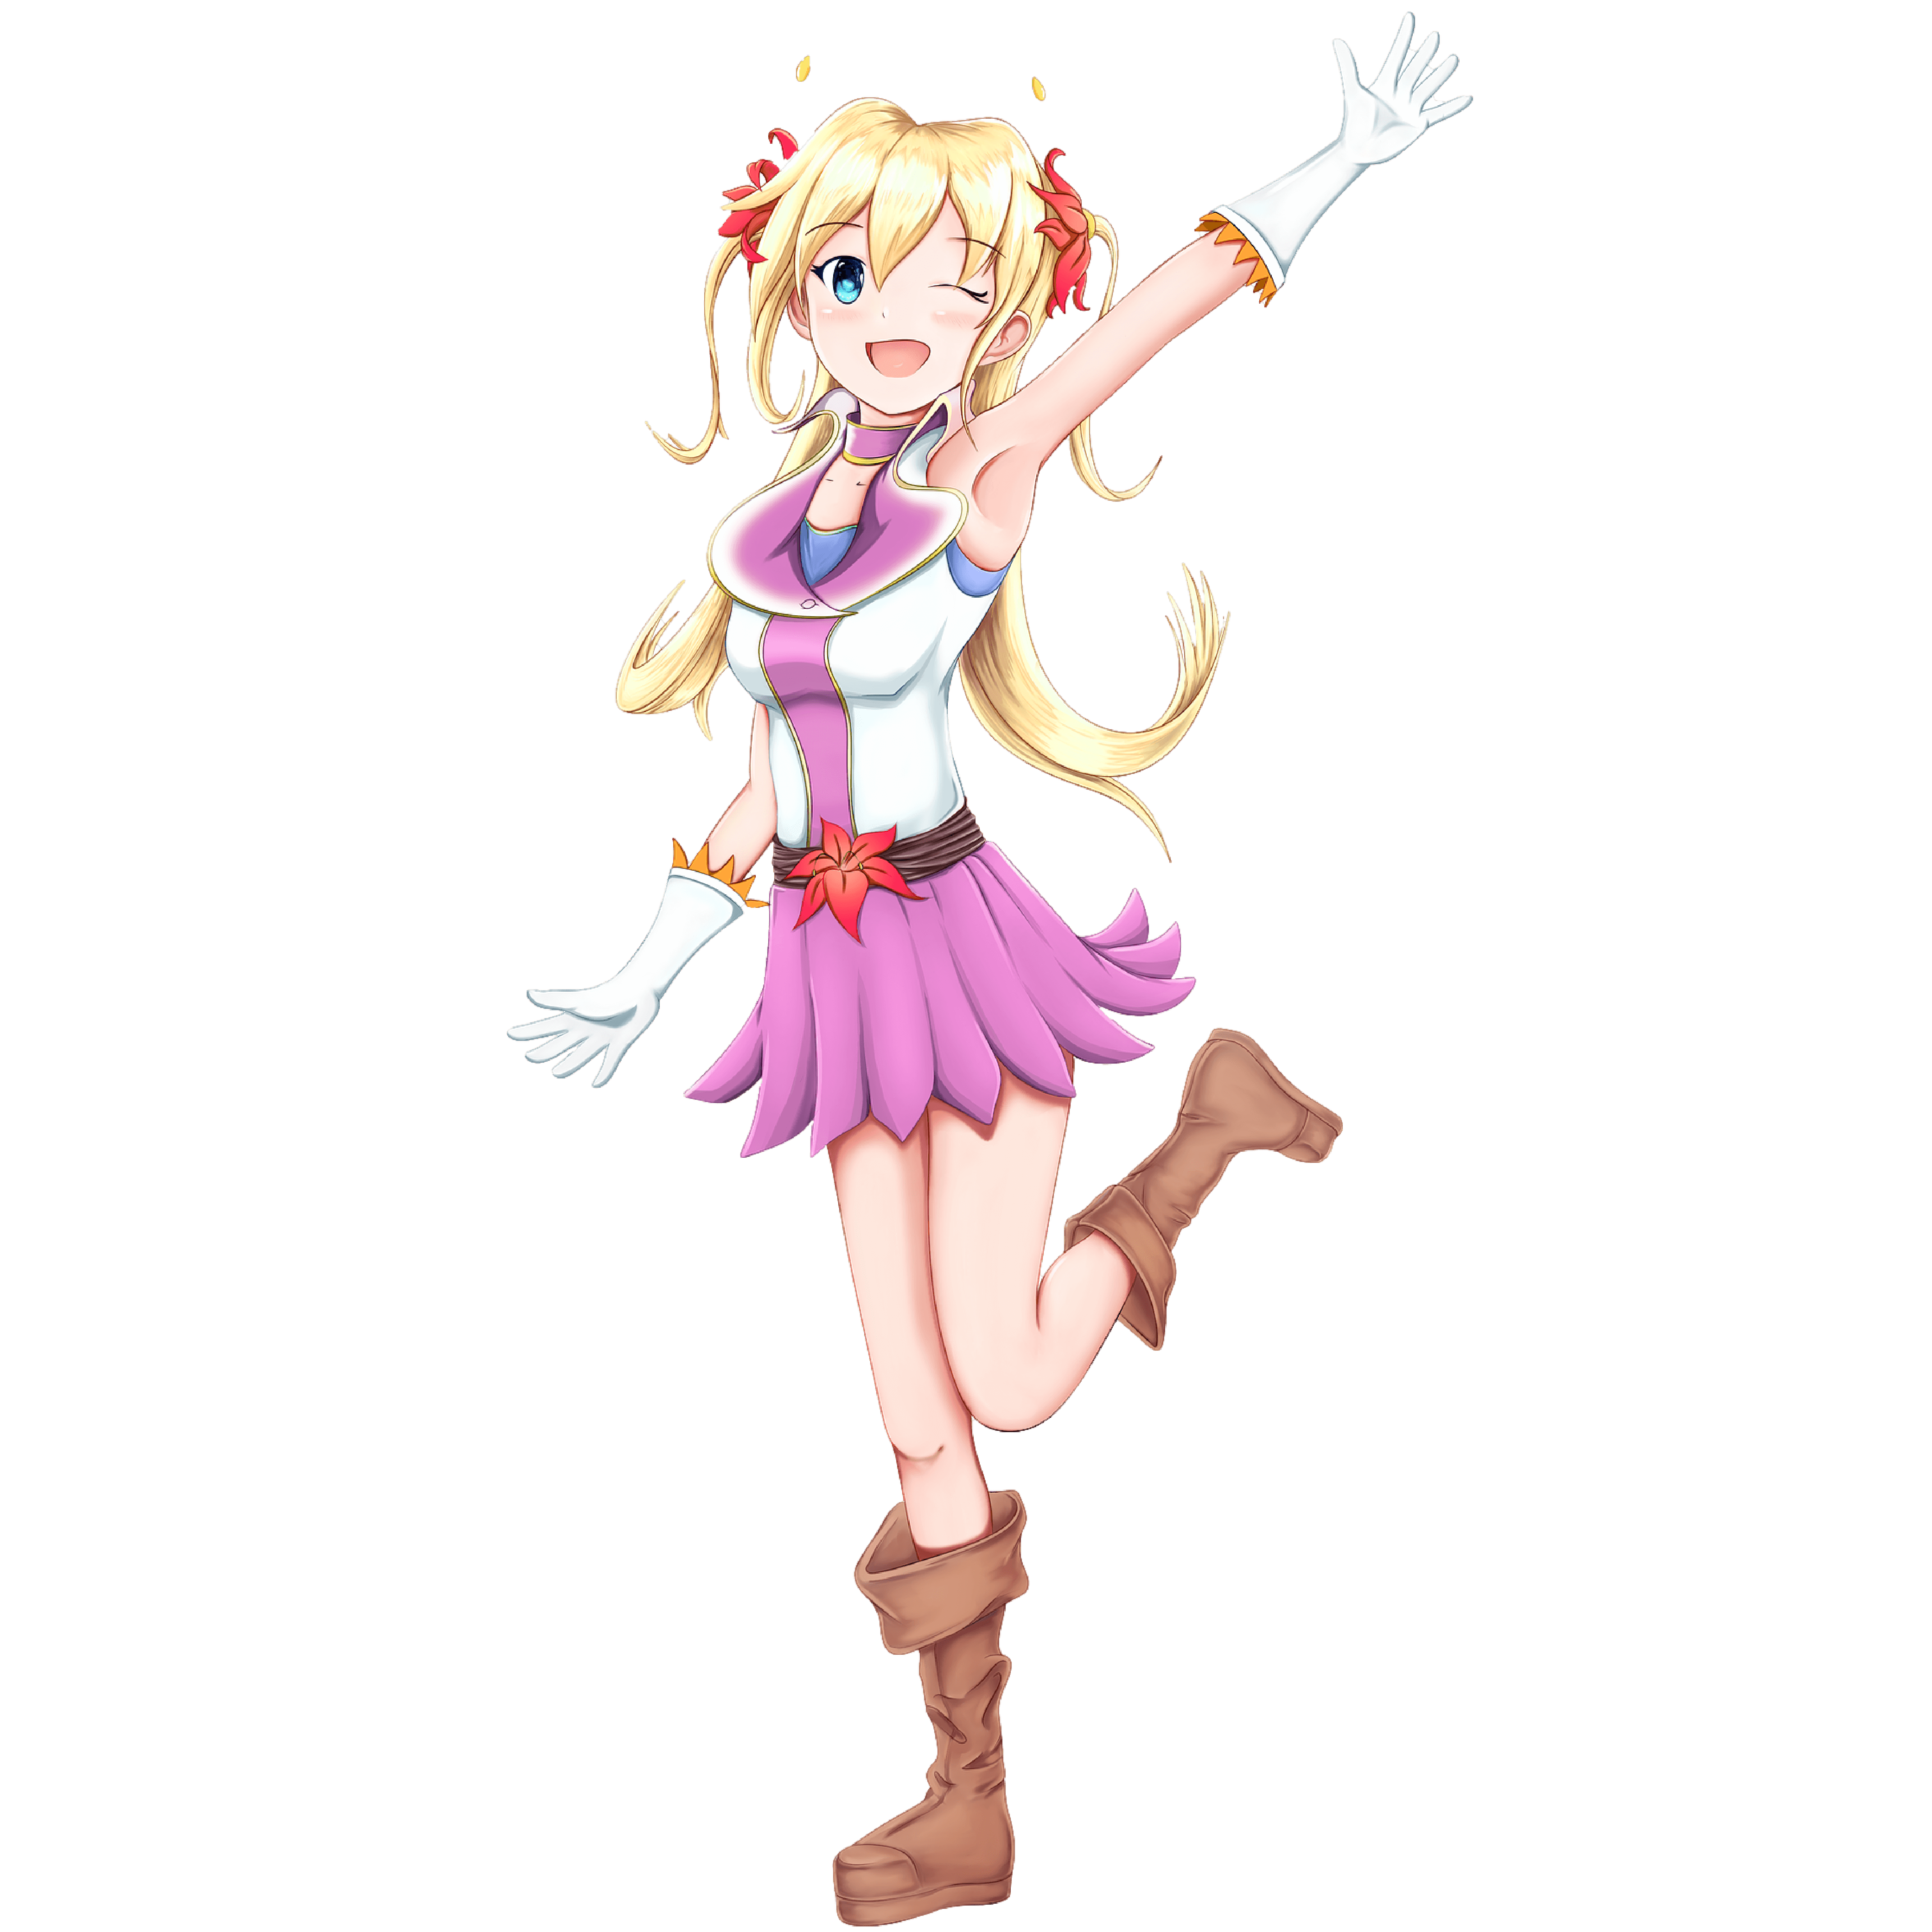 Anime Girl png, Anime Girl Clip Art, Anime Girl png, Anime Girl png Transparent Png, Anime Girl png, transparent, background, free download, large Anime Girl png, Anime Girl png hd,